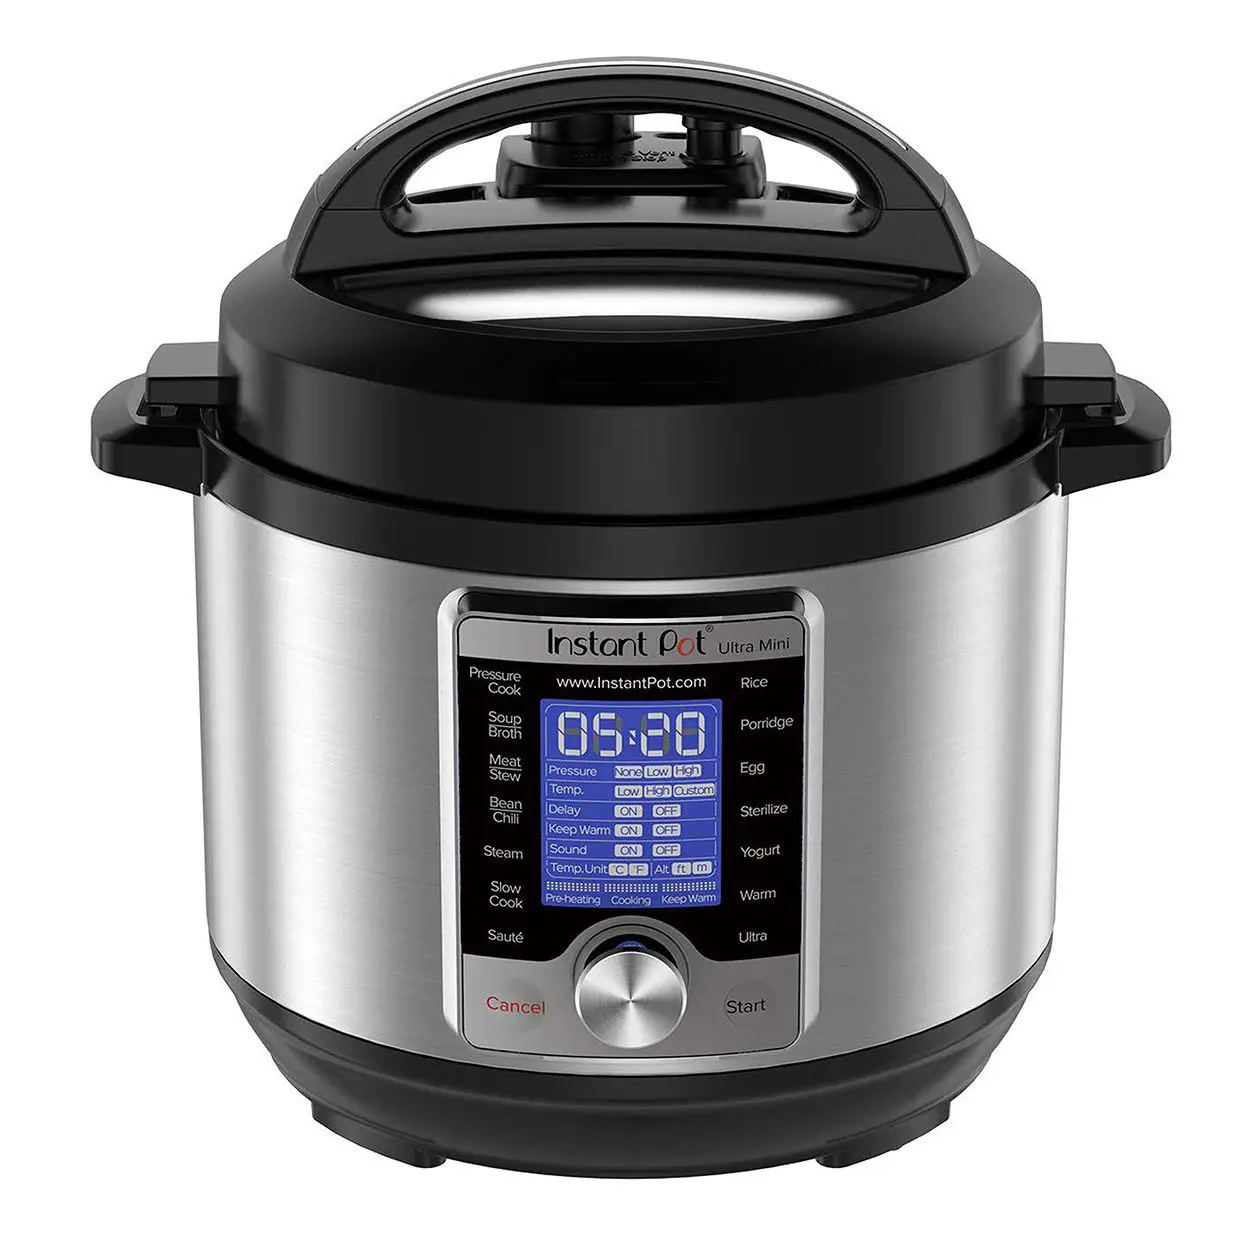 The Instant Pot Ultra Is at the Lowest Price It